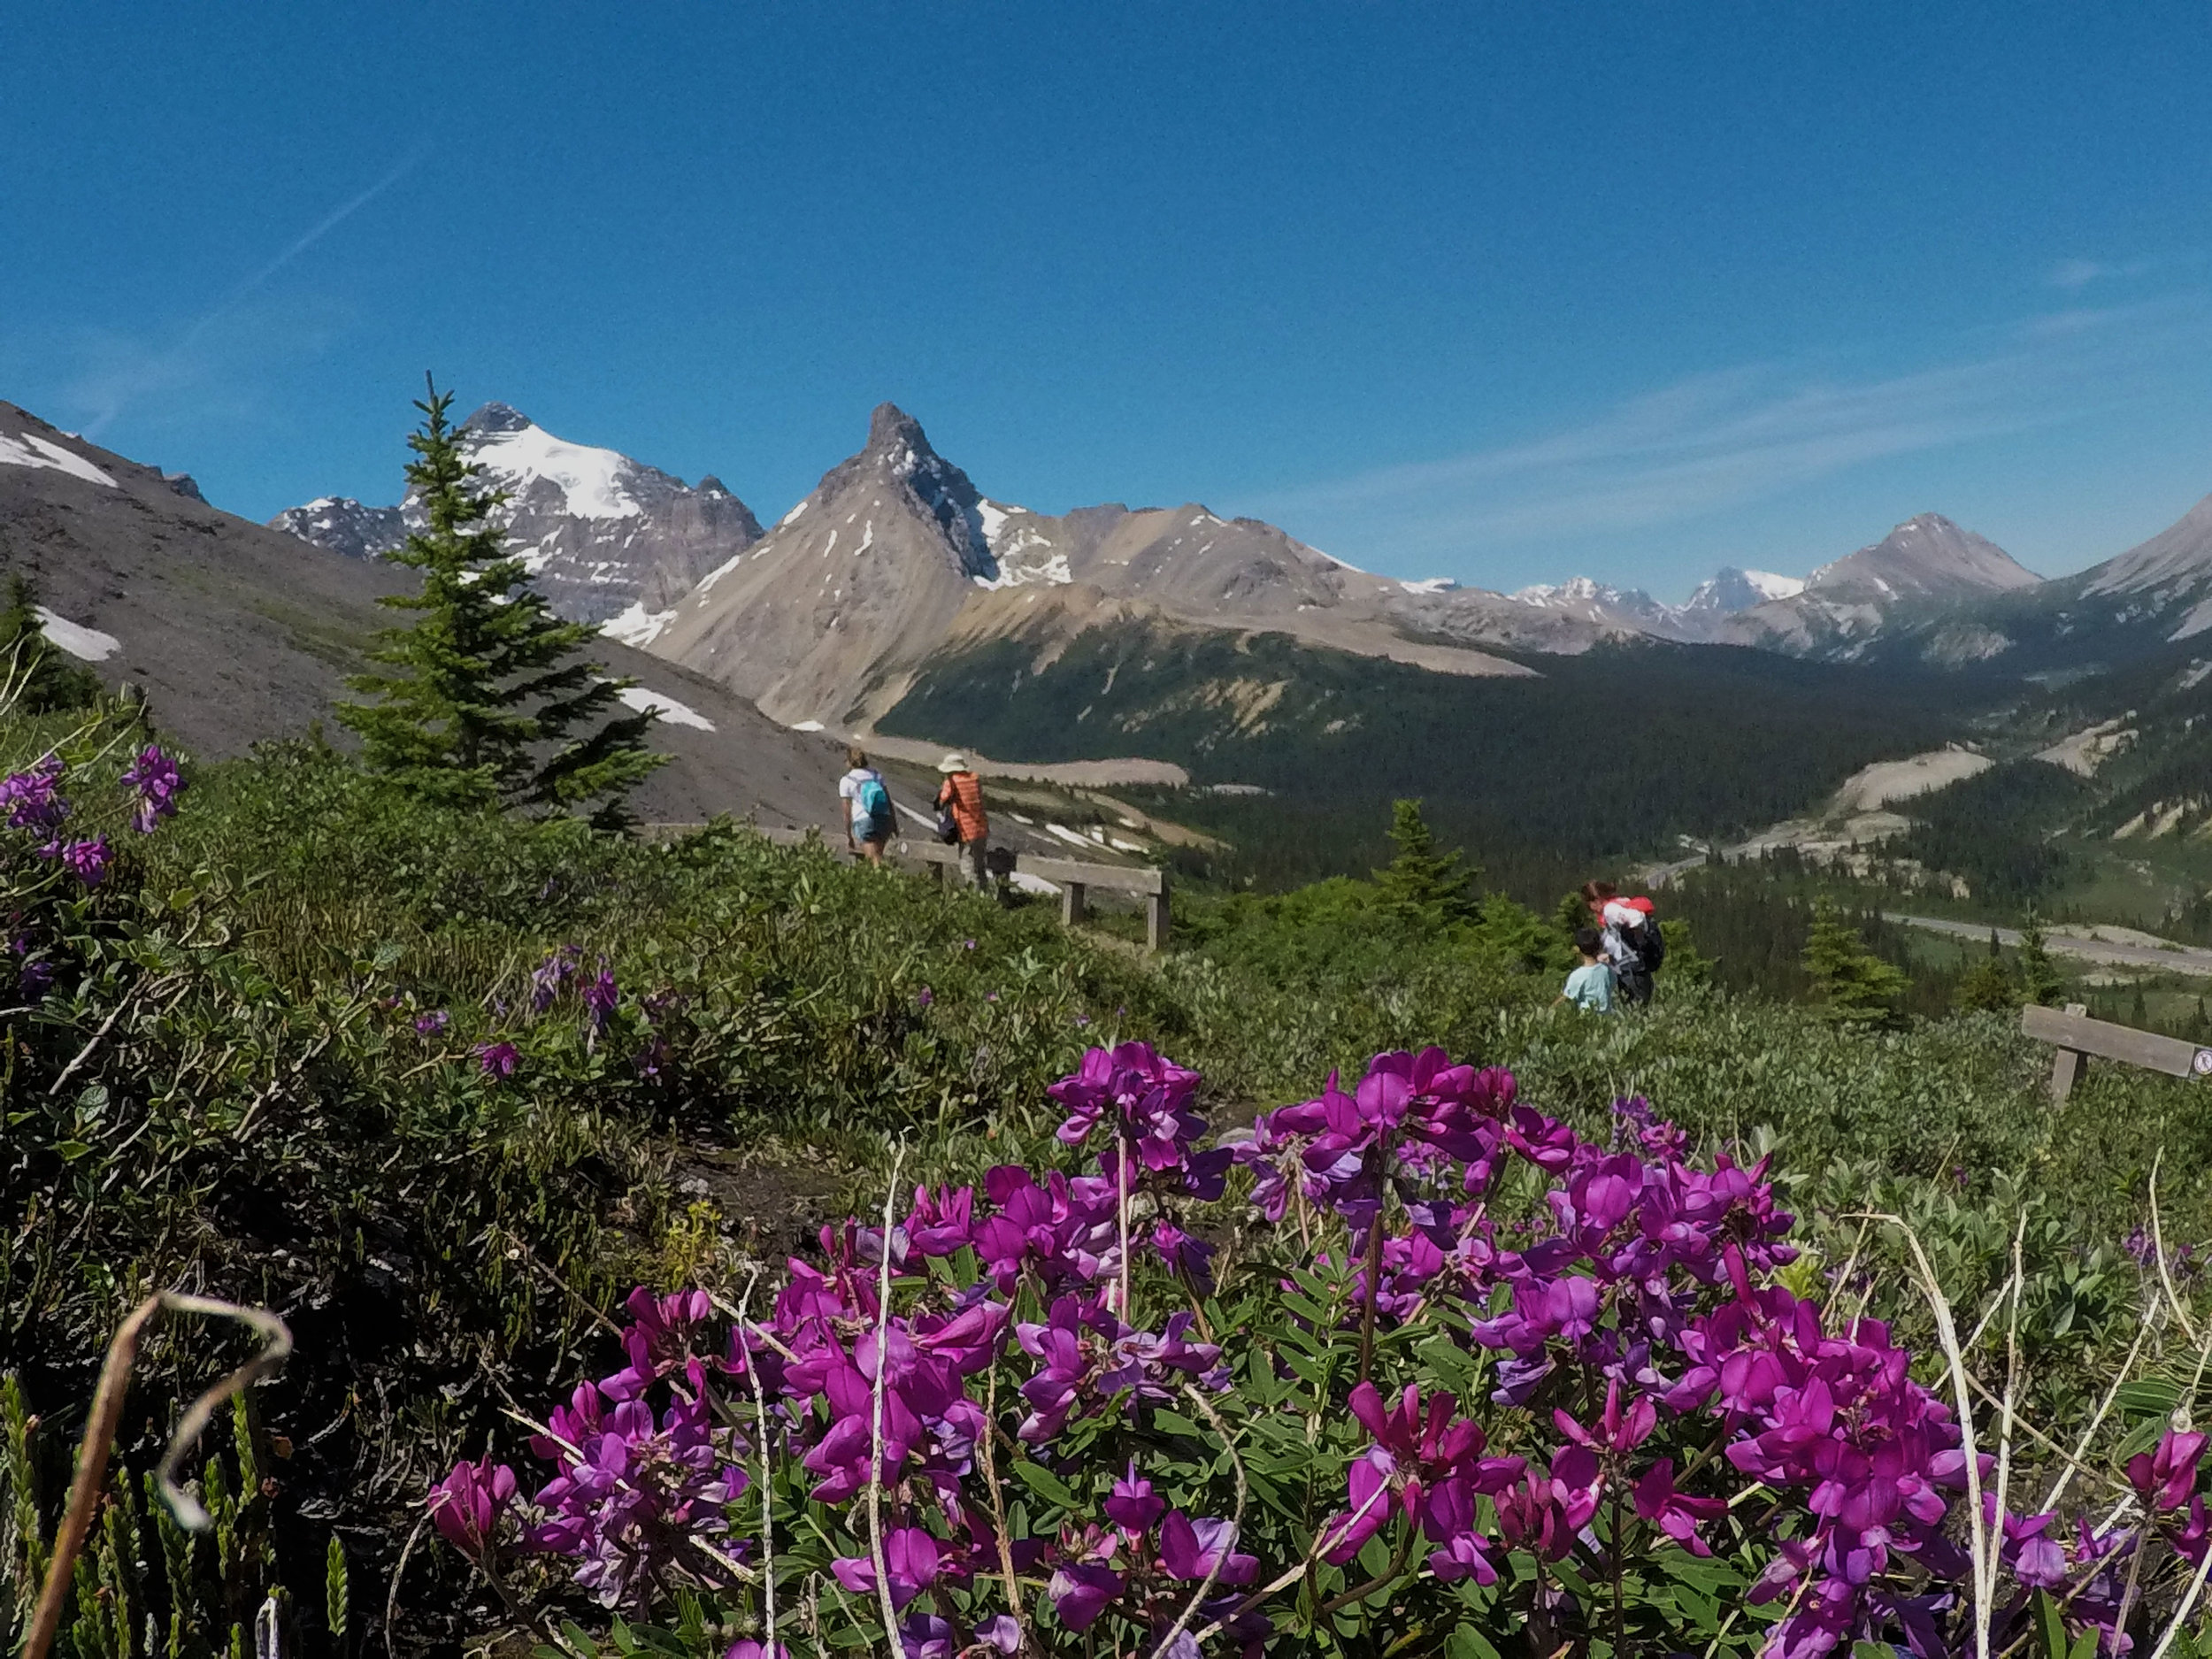 guided hiking tour in the Canadian Rockies.